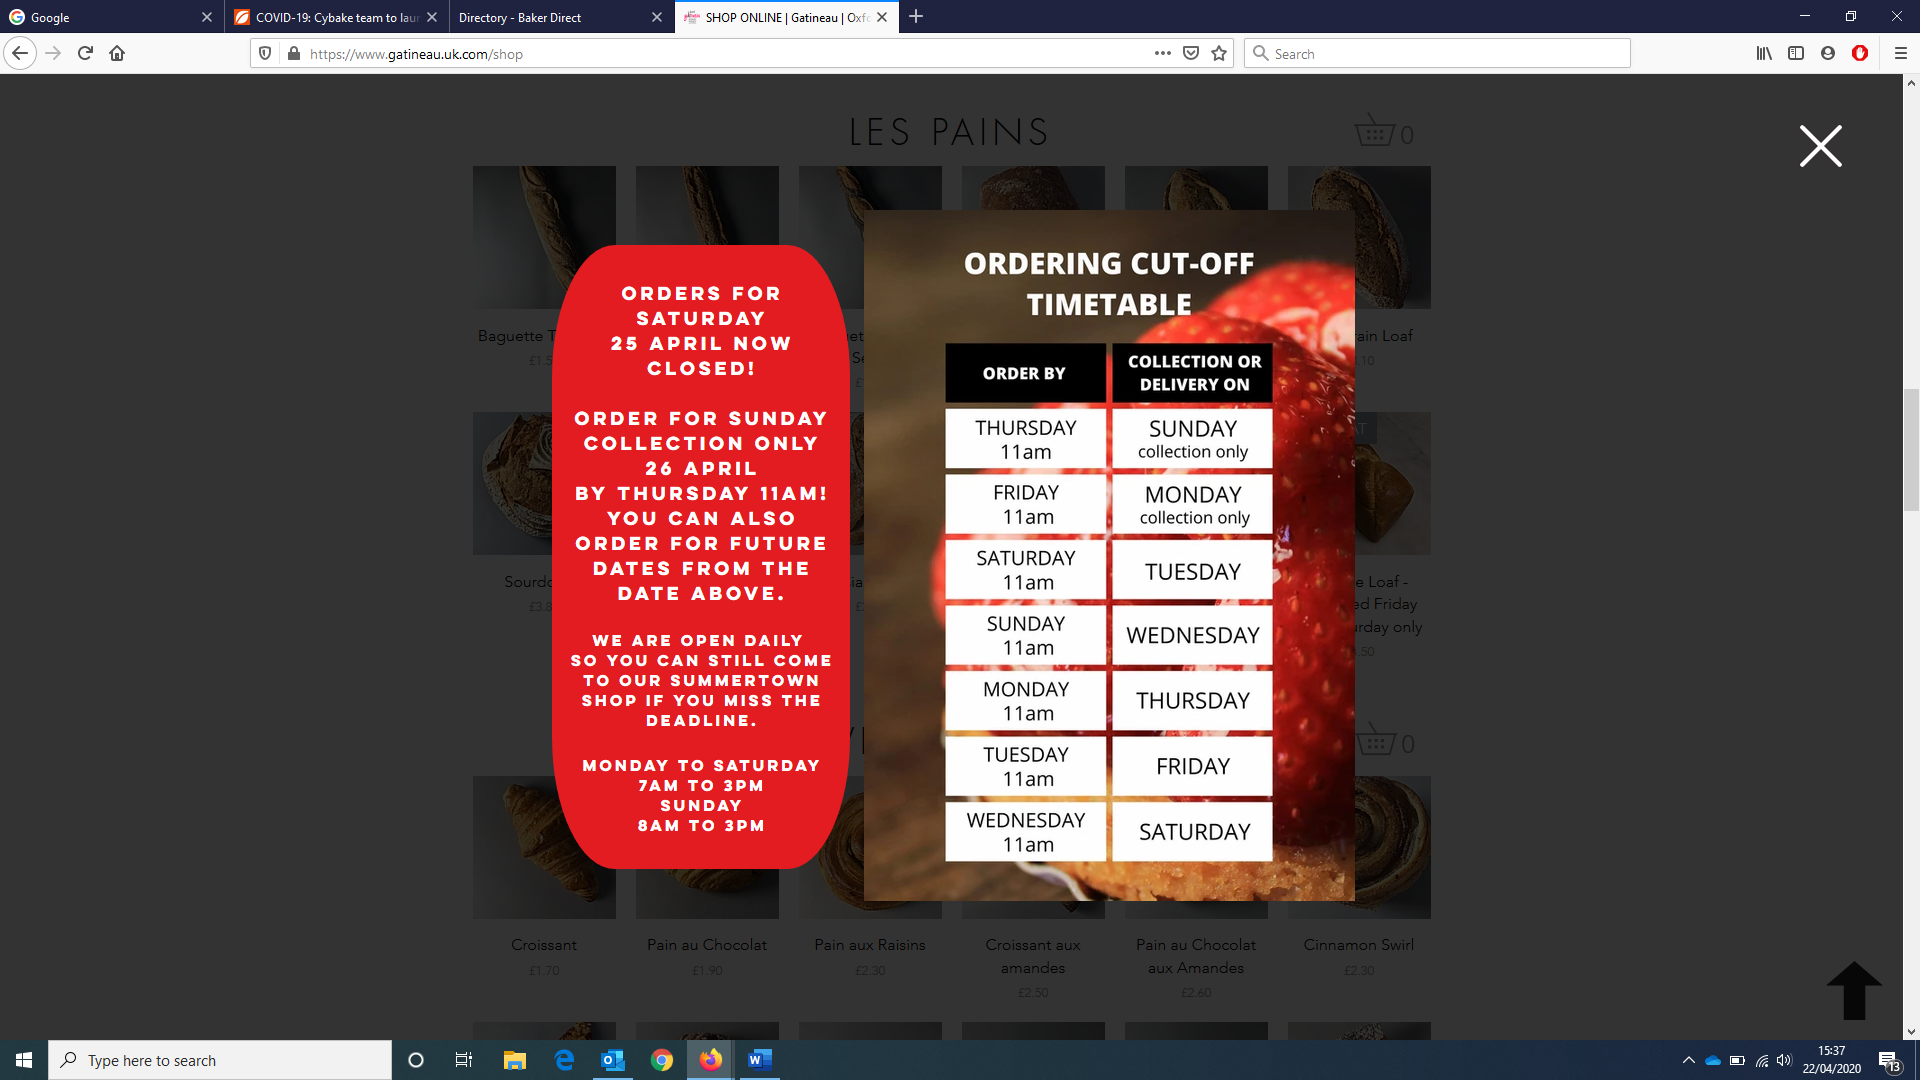 Cybake allows for online ordering cut off times